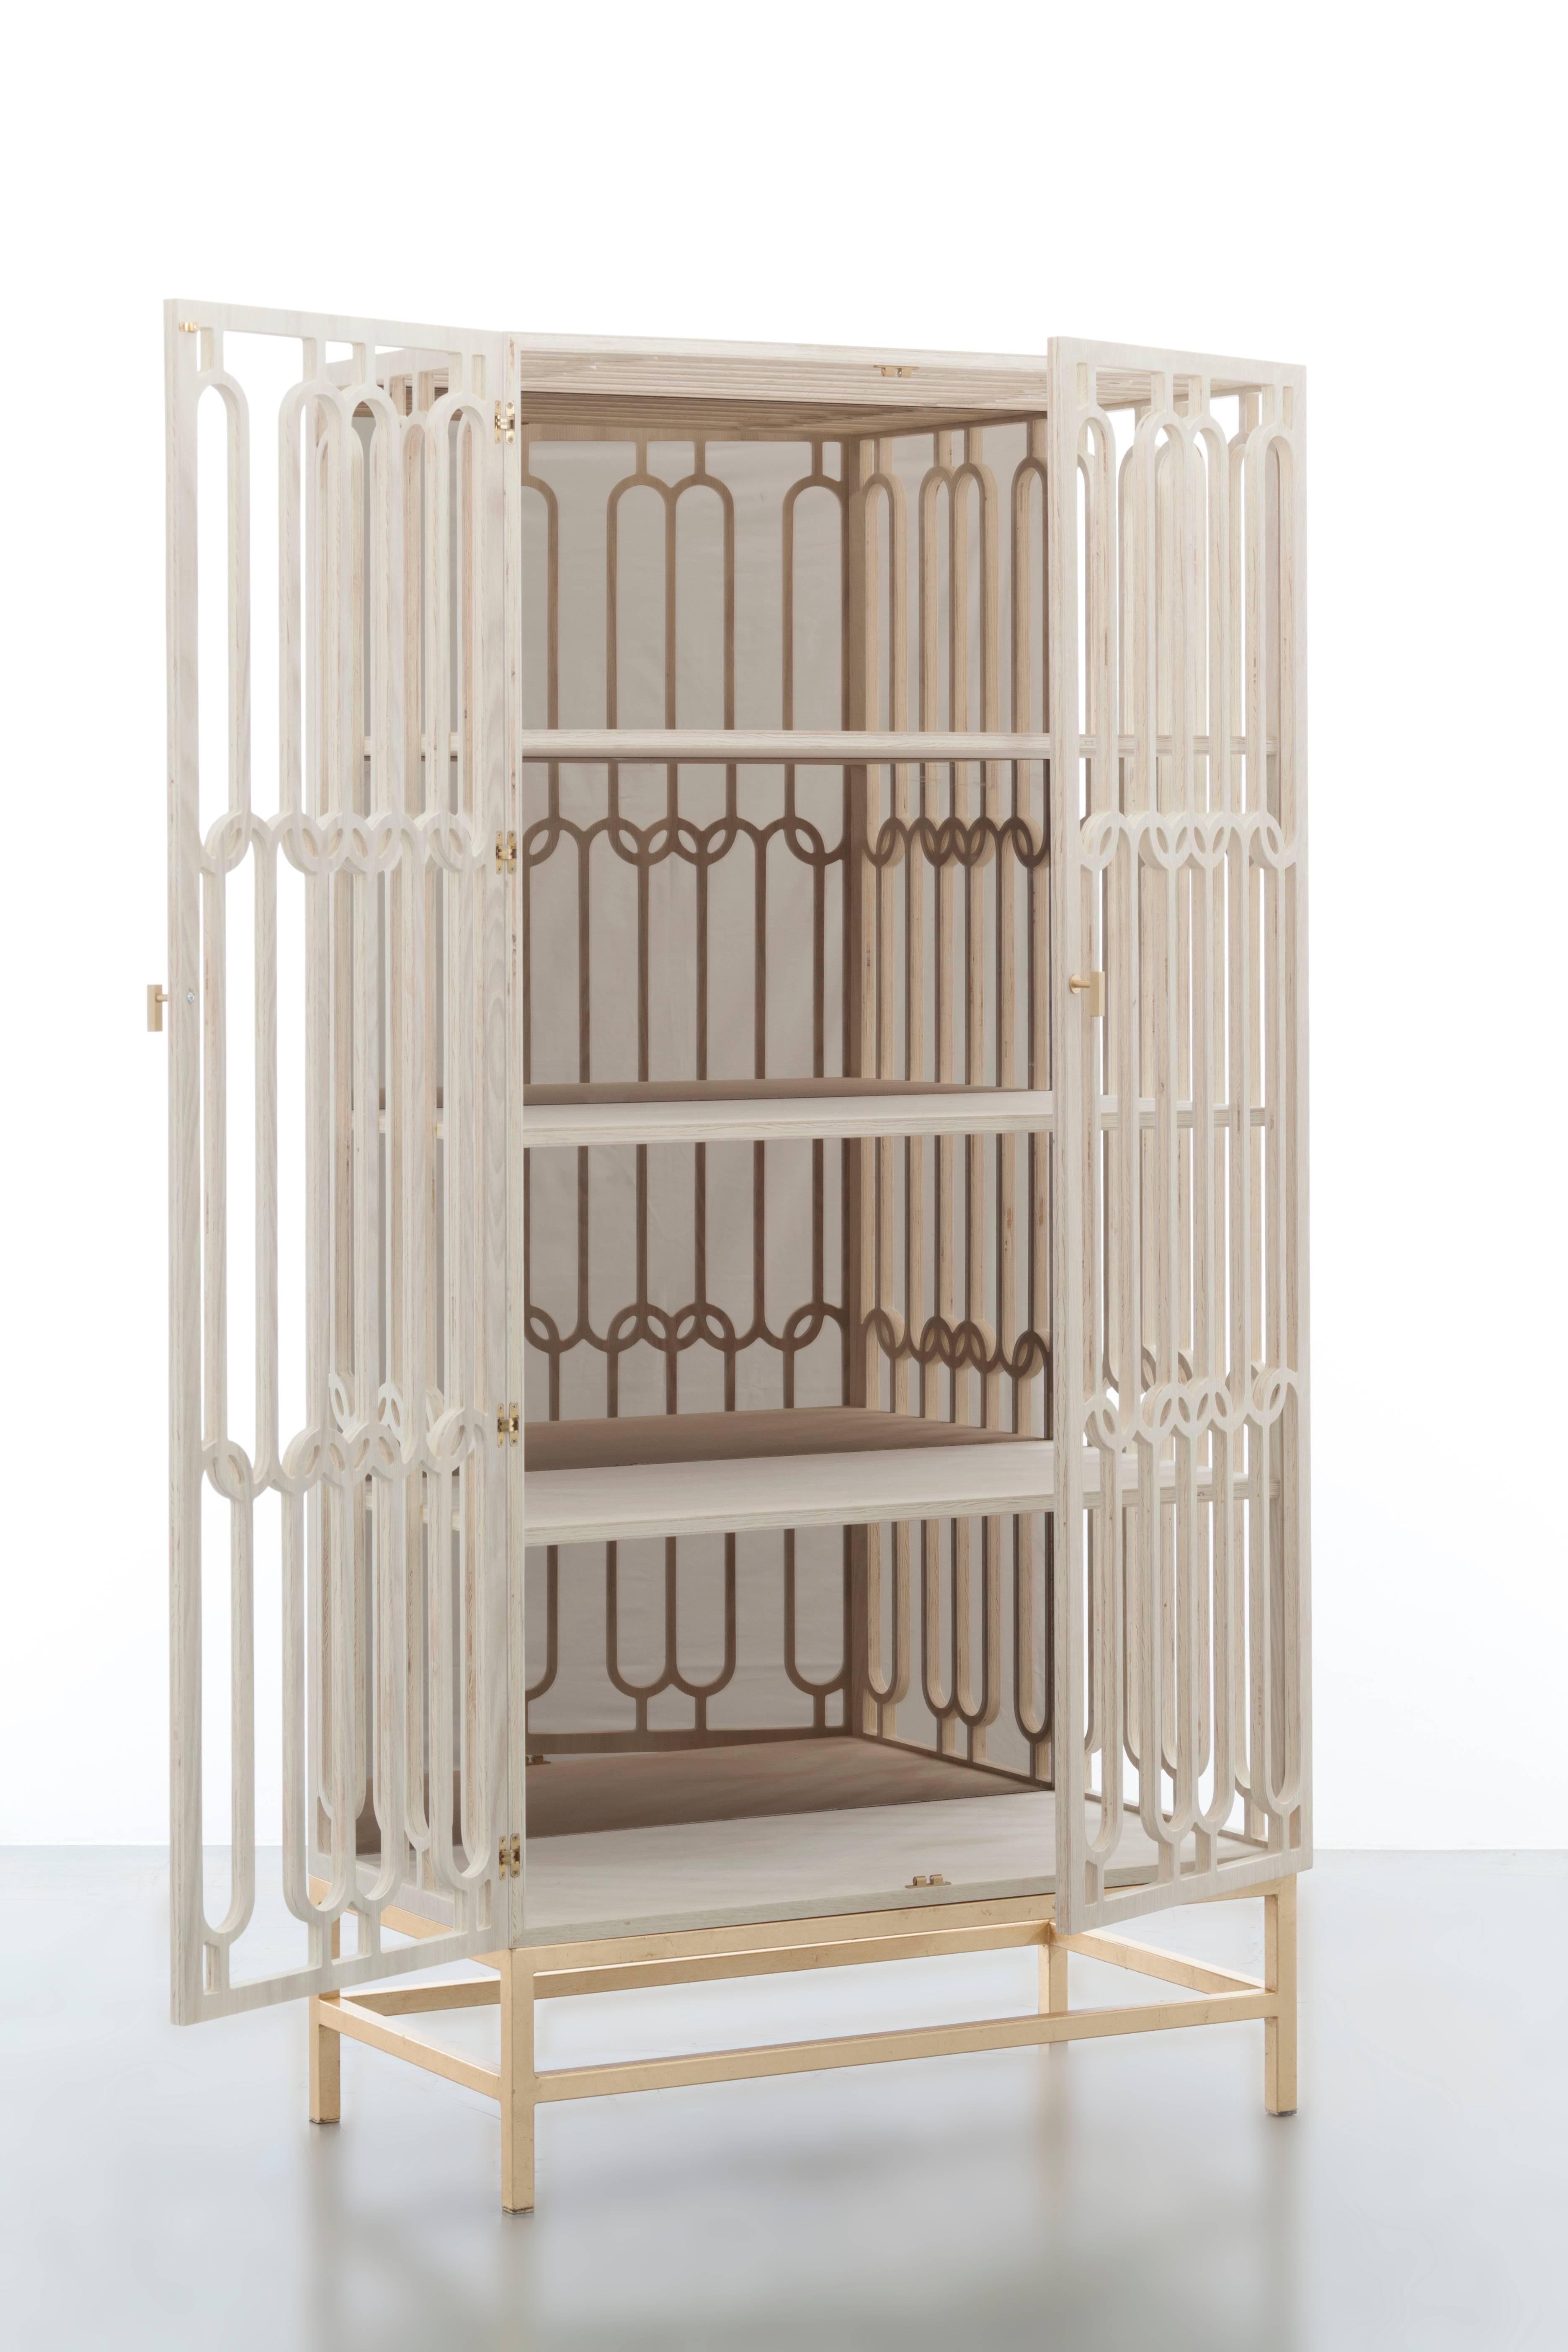 CHLOE CABINET - Modern Cabinet in Bleached Oak with Geometric Latitce Design

The Chloe cabinet is a stunning piece of furniture that boasts a unique modern lattice design in bleached white oak. It features a gold leaf base and a bronze mirror